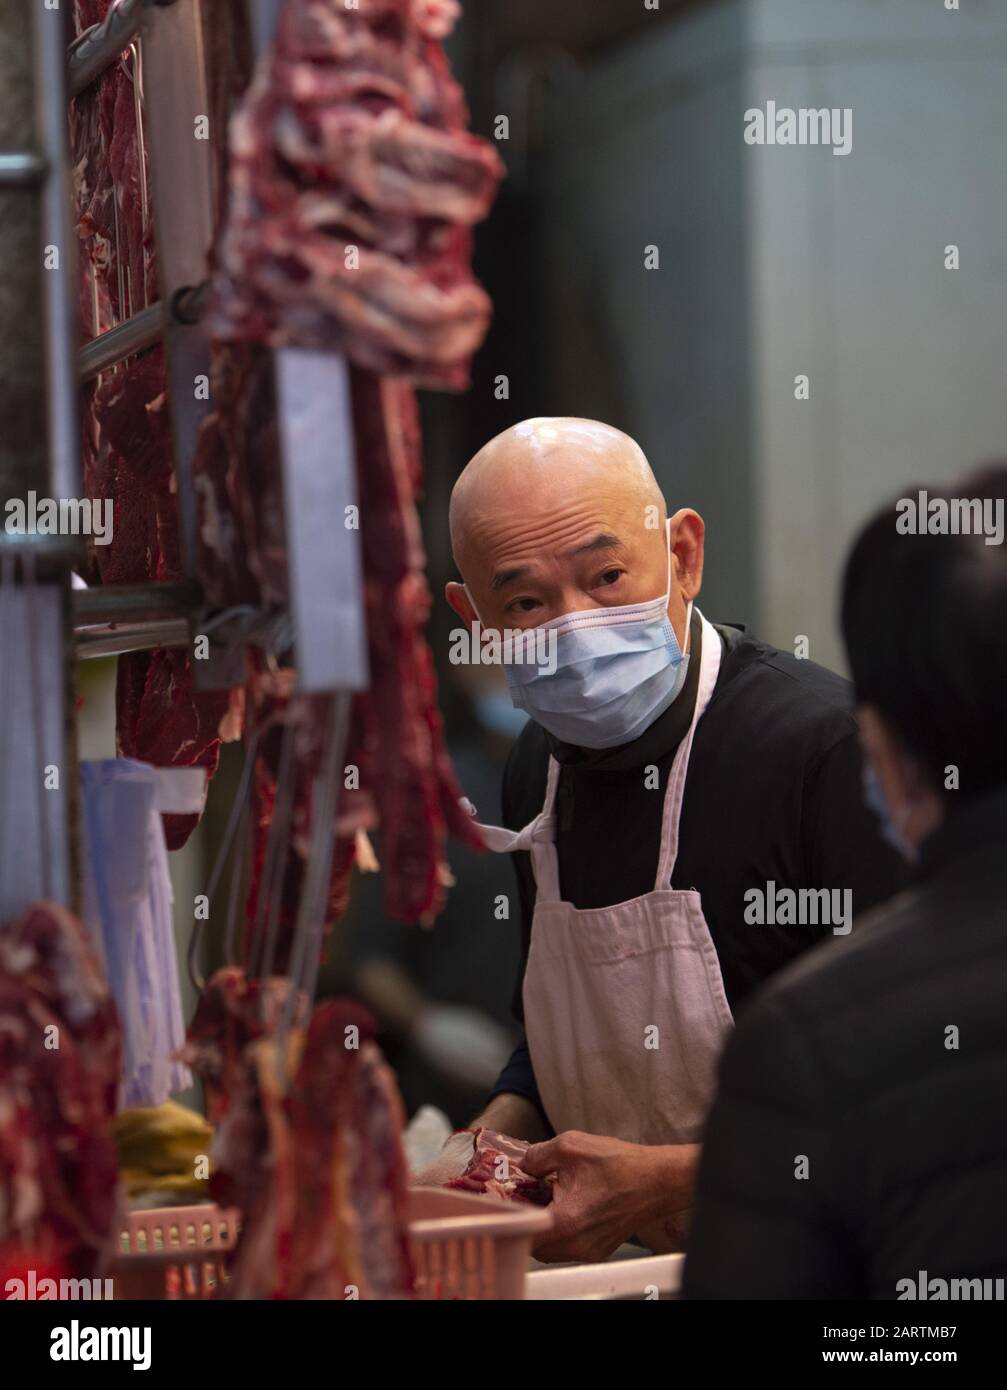 January 29, 2020, Hong Kong, Hong Kong SAR, China: A market worker wears a surgical mask as he does business. Fear of the Coronavirus from Wuhan China is evident on the streets of Hong Kong. North point markets are still busy. (Credit Image: © Jayne Russell/ZUMA Wire) Stock Photo